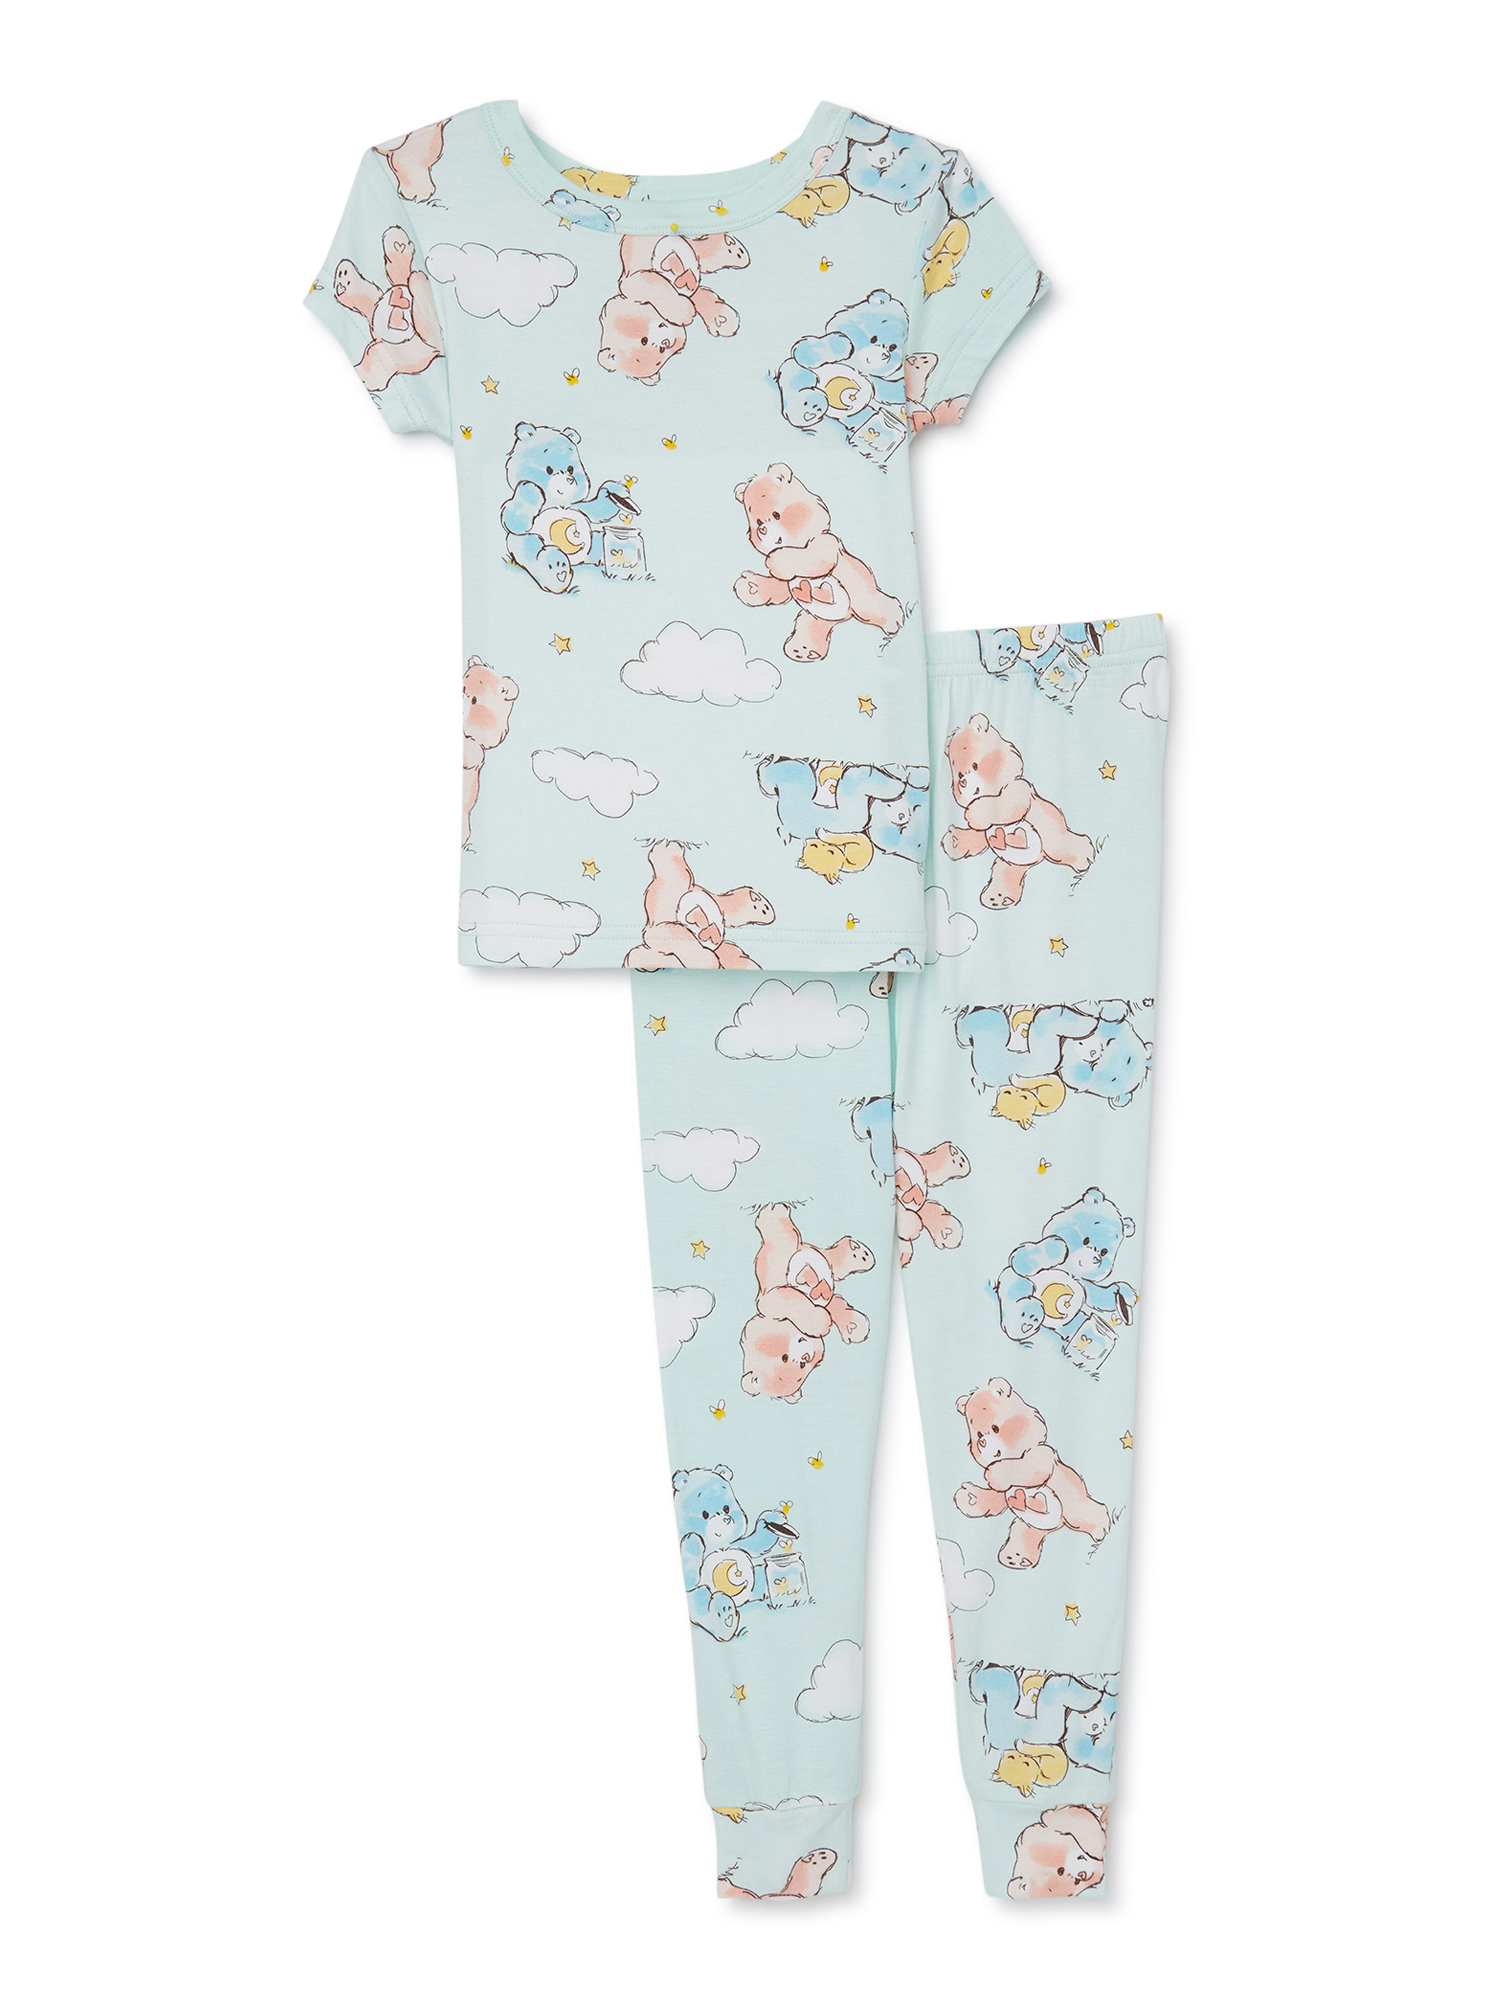 Care Bears Character Toddler Girl Viscose 2-Piece Pajama Set, Size 12m-5t, Toddler Girl's, Size: 3T, Green